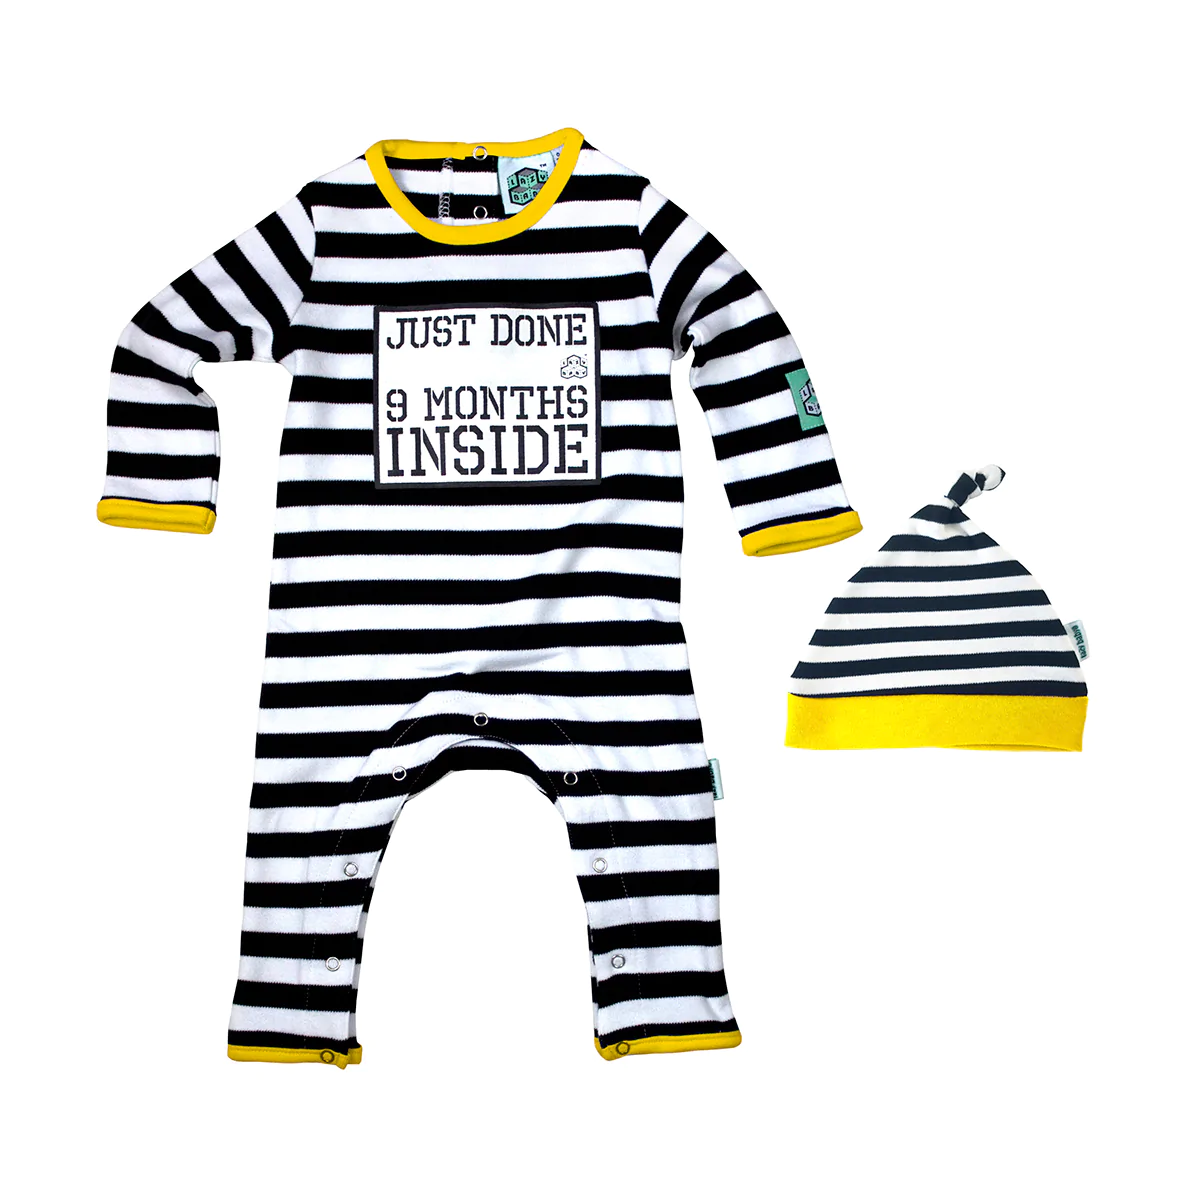 Just Done 9 Months Inside black and white striped baby grow with yellow edging and matching hat